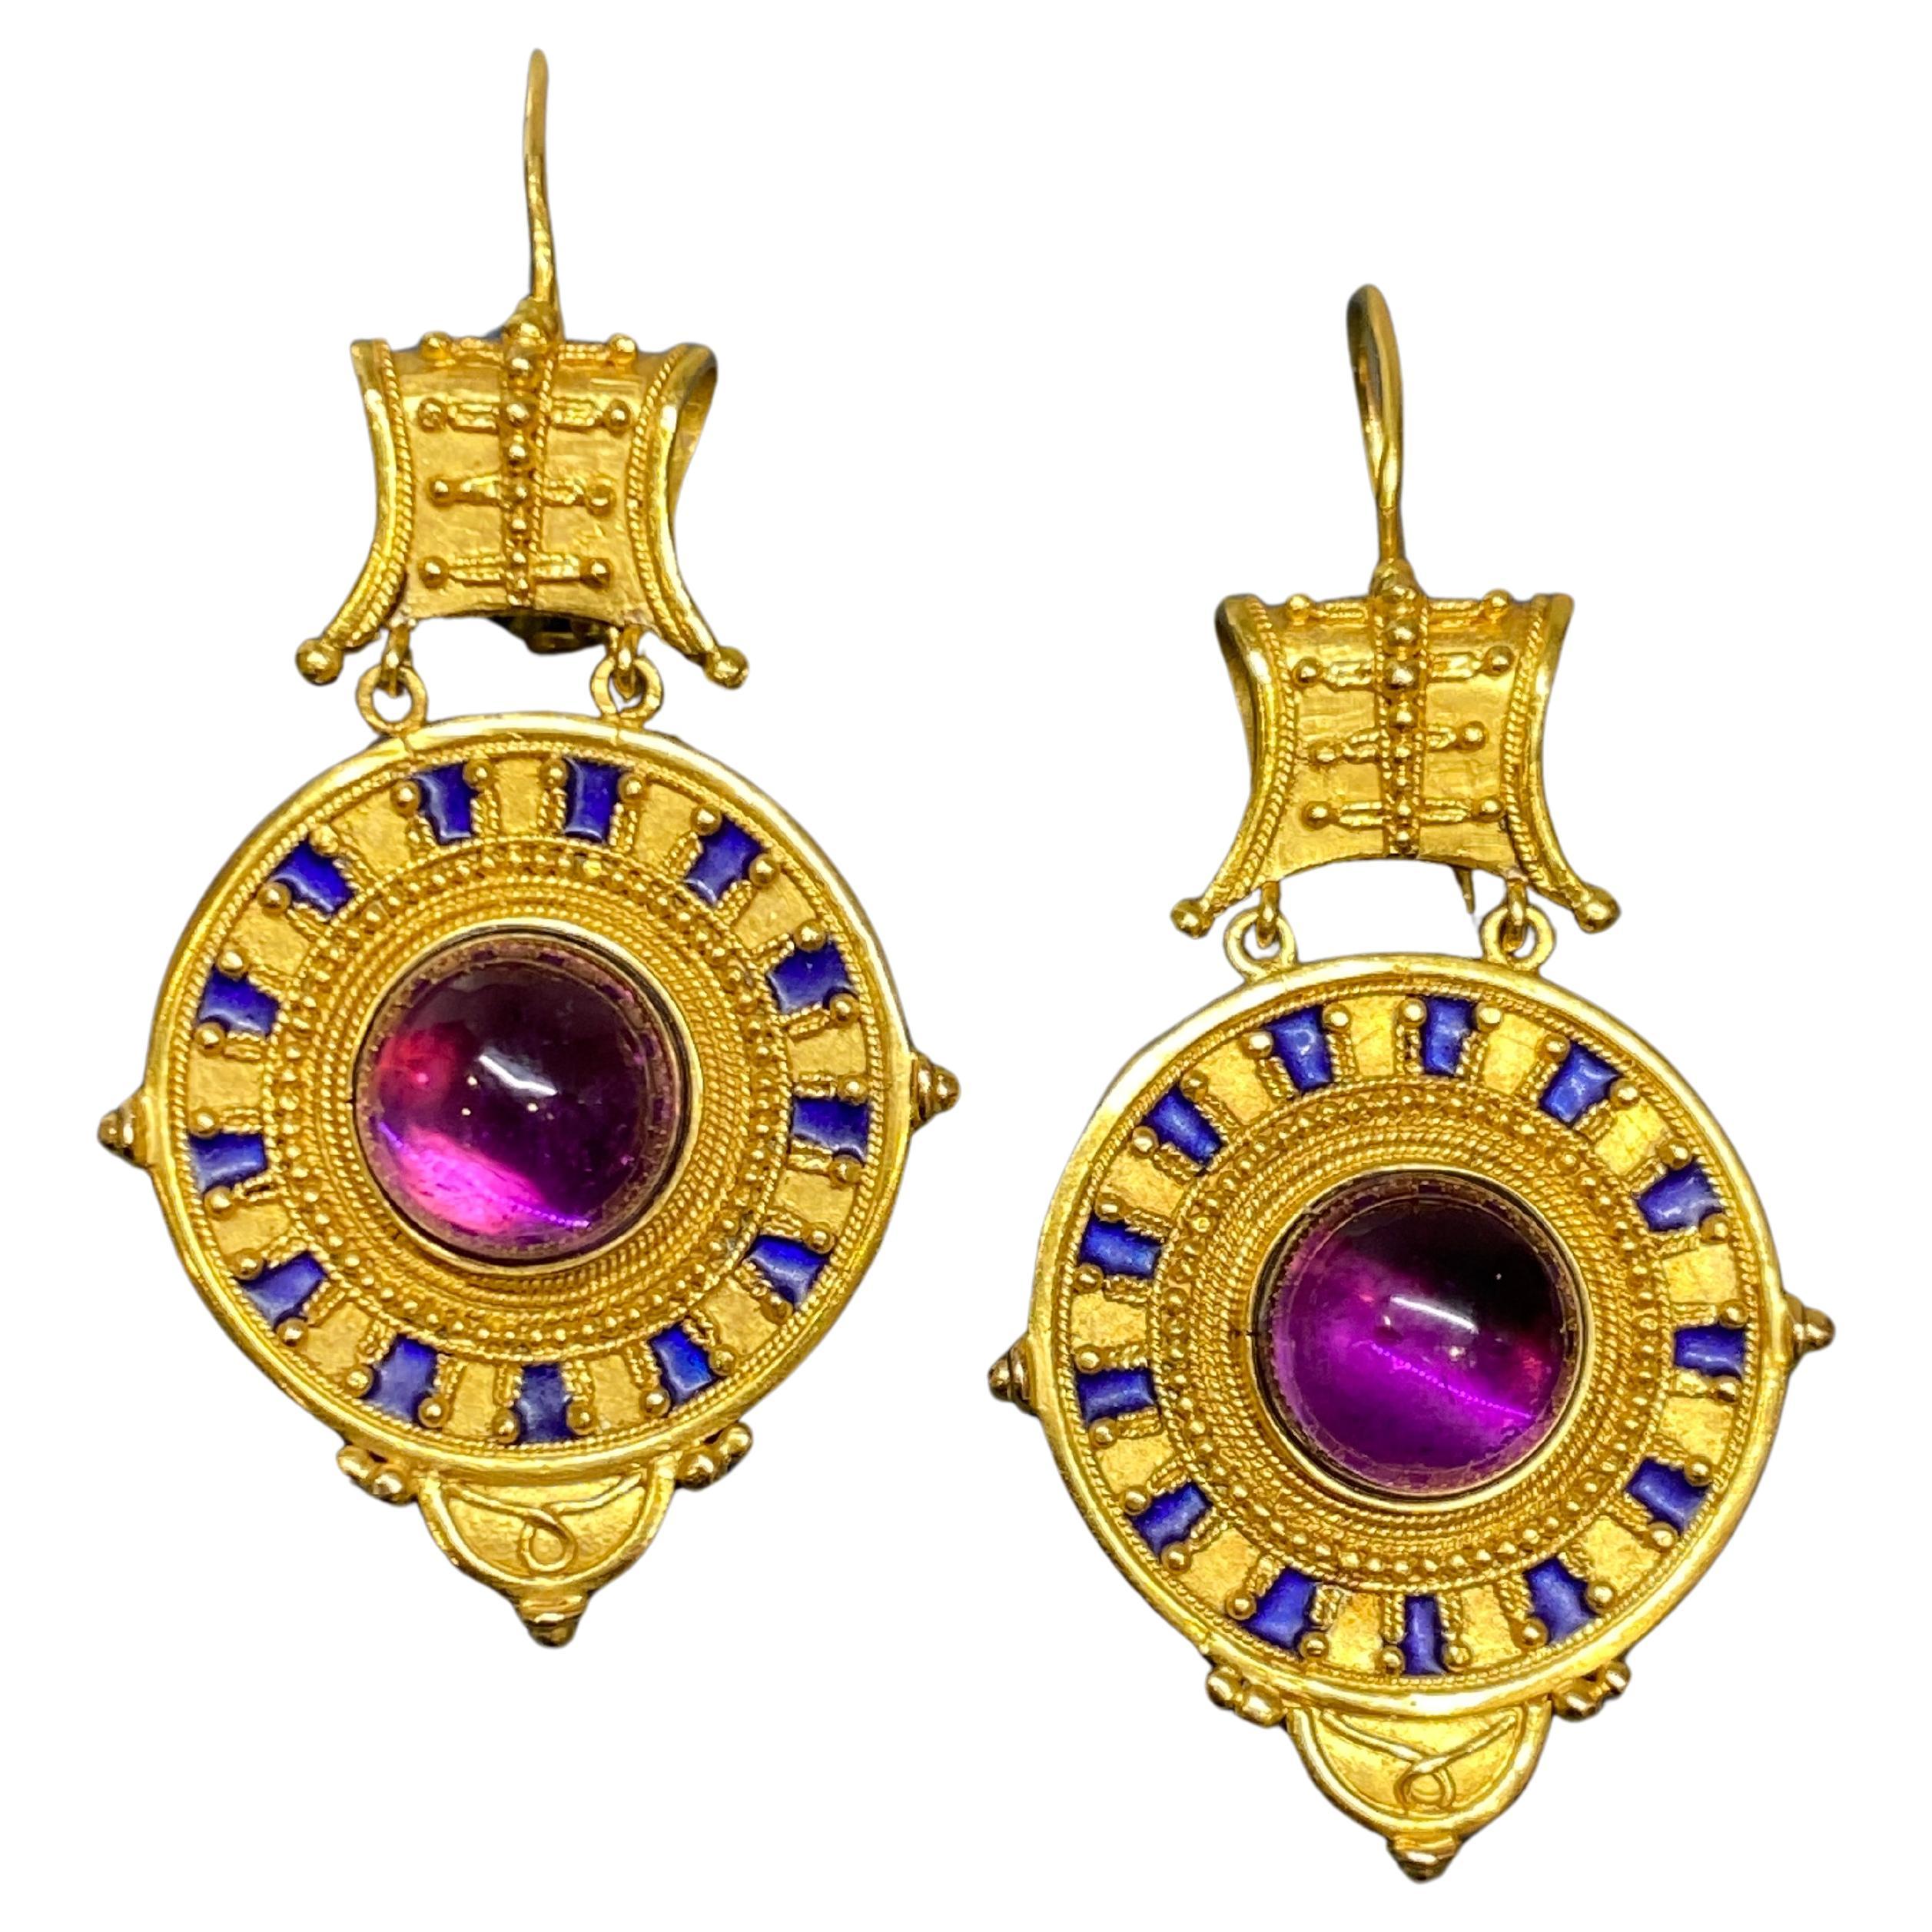 Superb pair of late 19th century etruscan, archaeological revival earrings, artfully crafted by Castellani, one of the leading jewellery masters during the Victorian period.

These magnificent earrings feature a medallion circlet with a high done